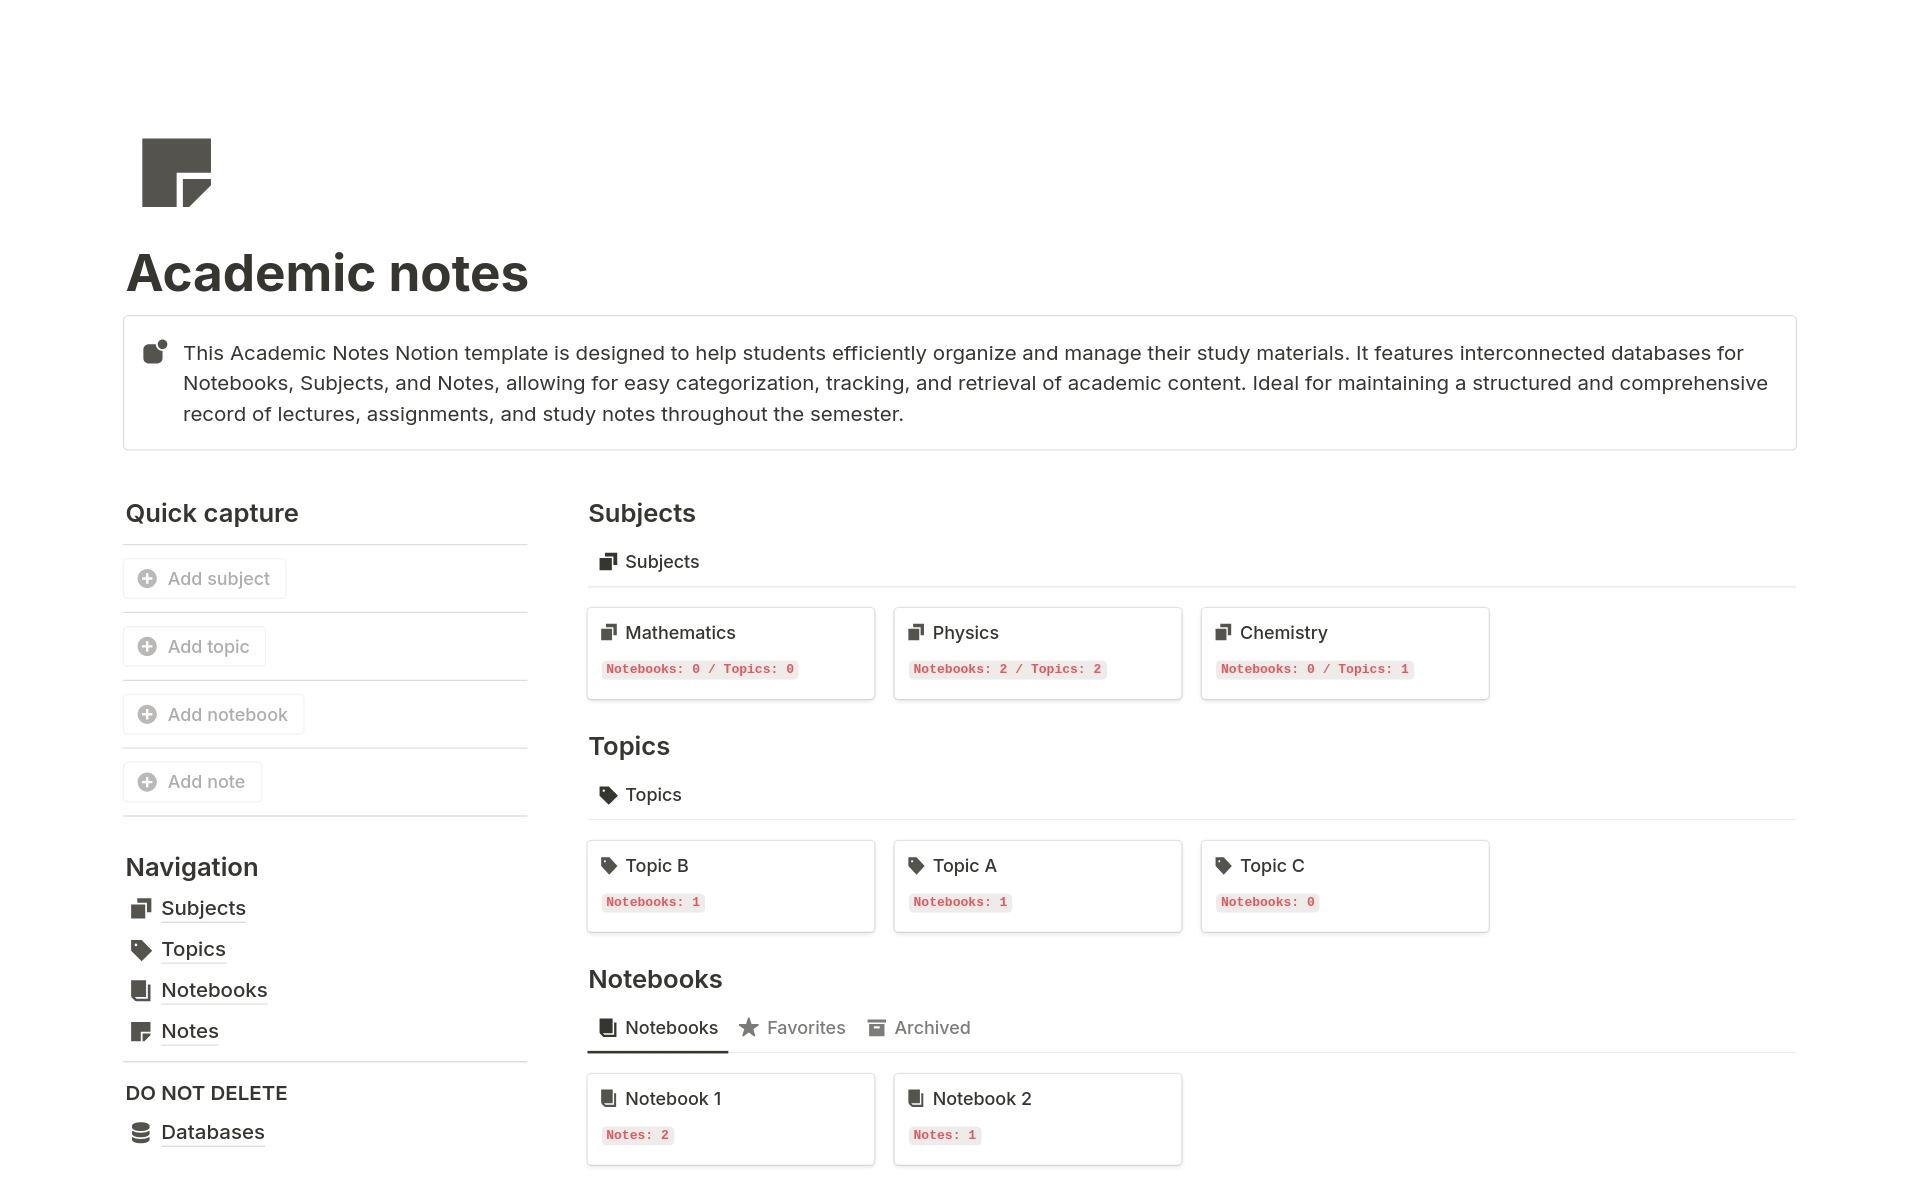 This Academic Notes Notion template is designed to help students efficiently organize and manage their study materials.